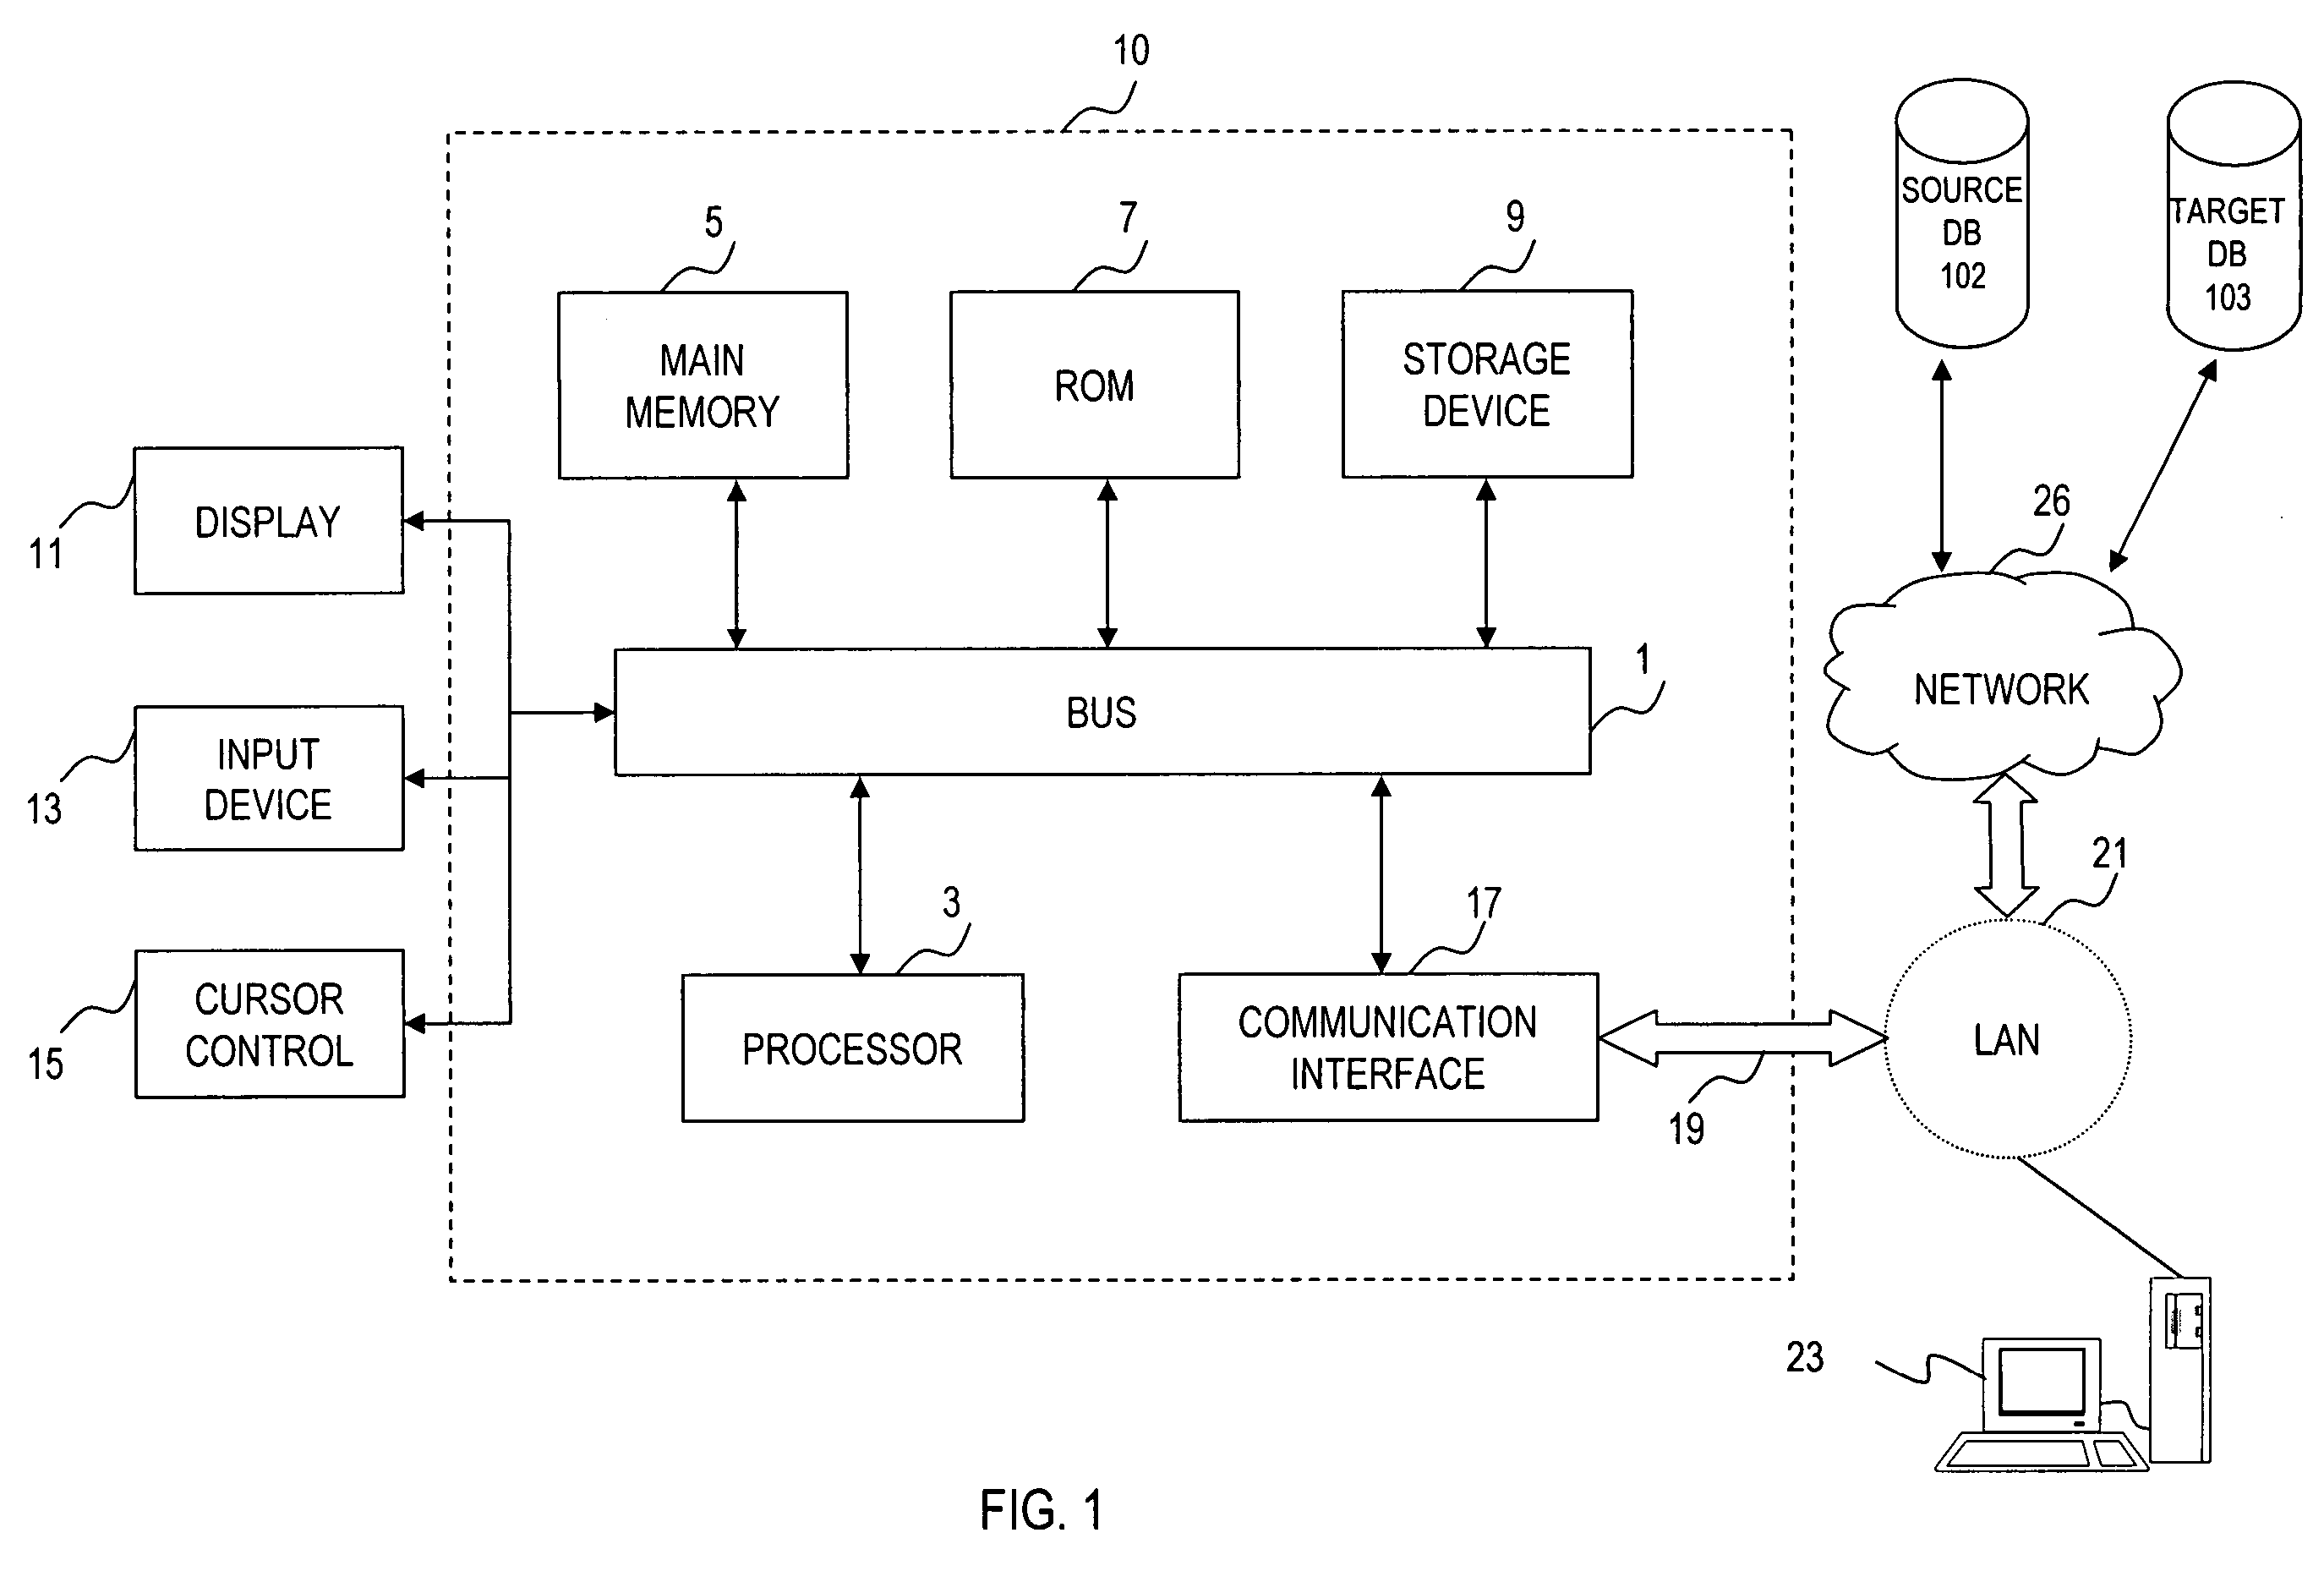 Method and apparatus for initializing data propagation execution for large database replication